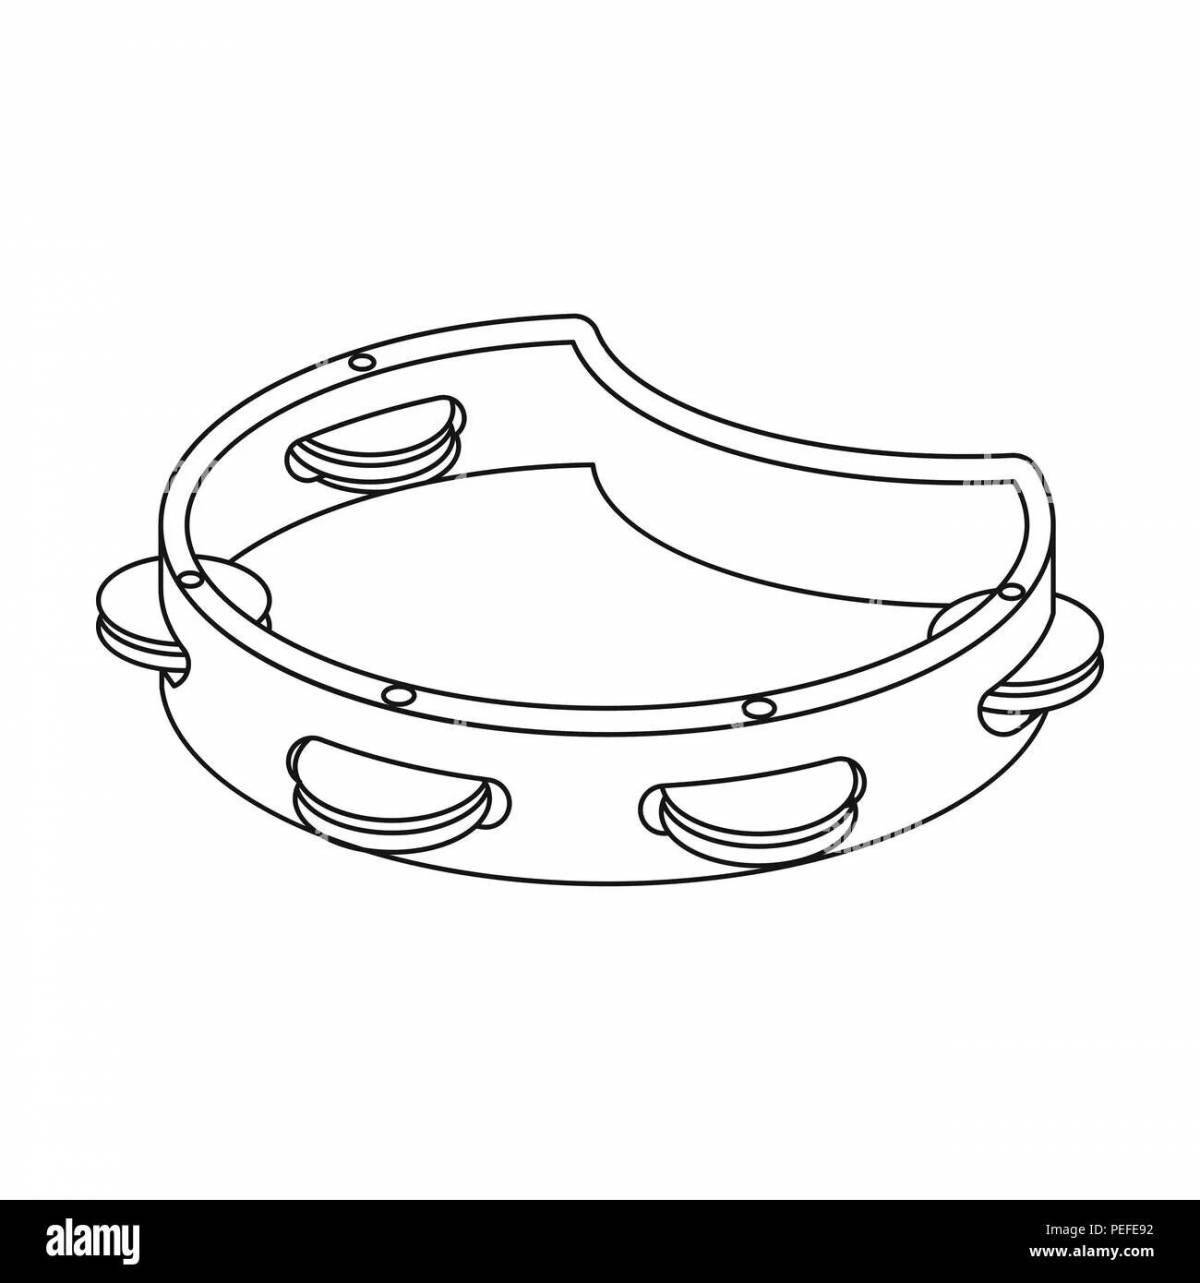 Violent tambourine coloring pages for kids